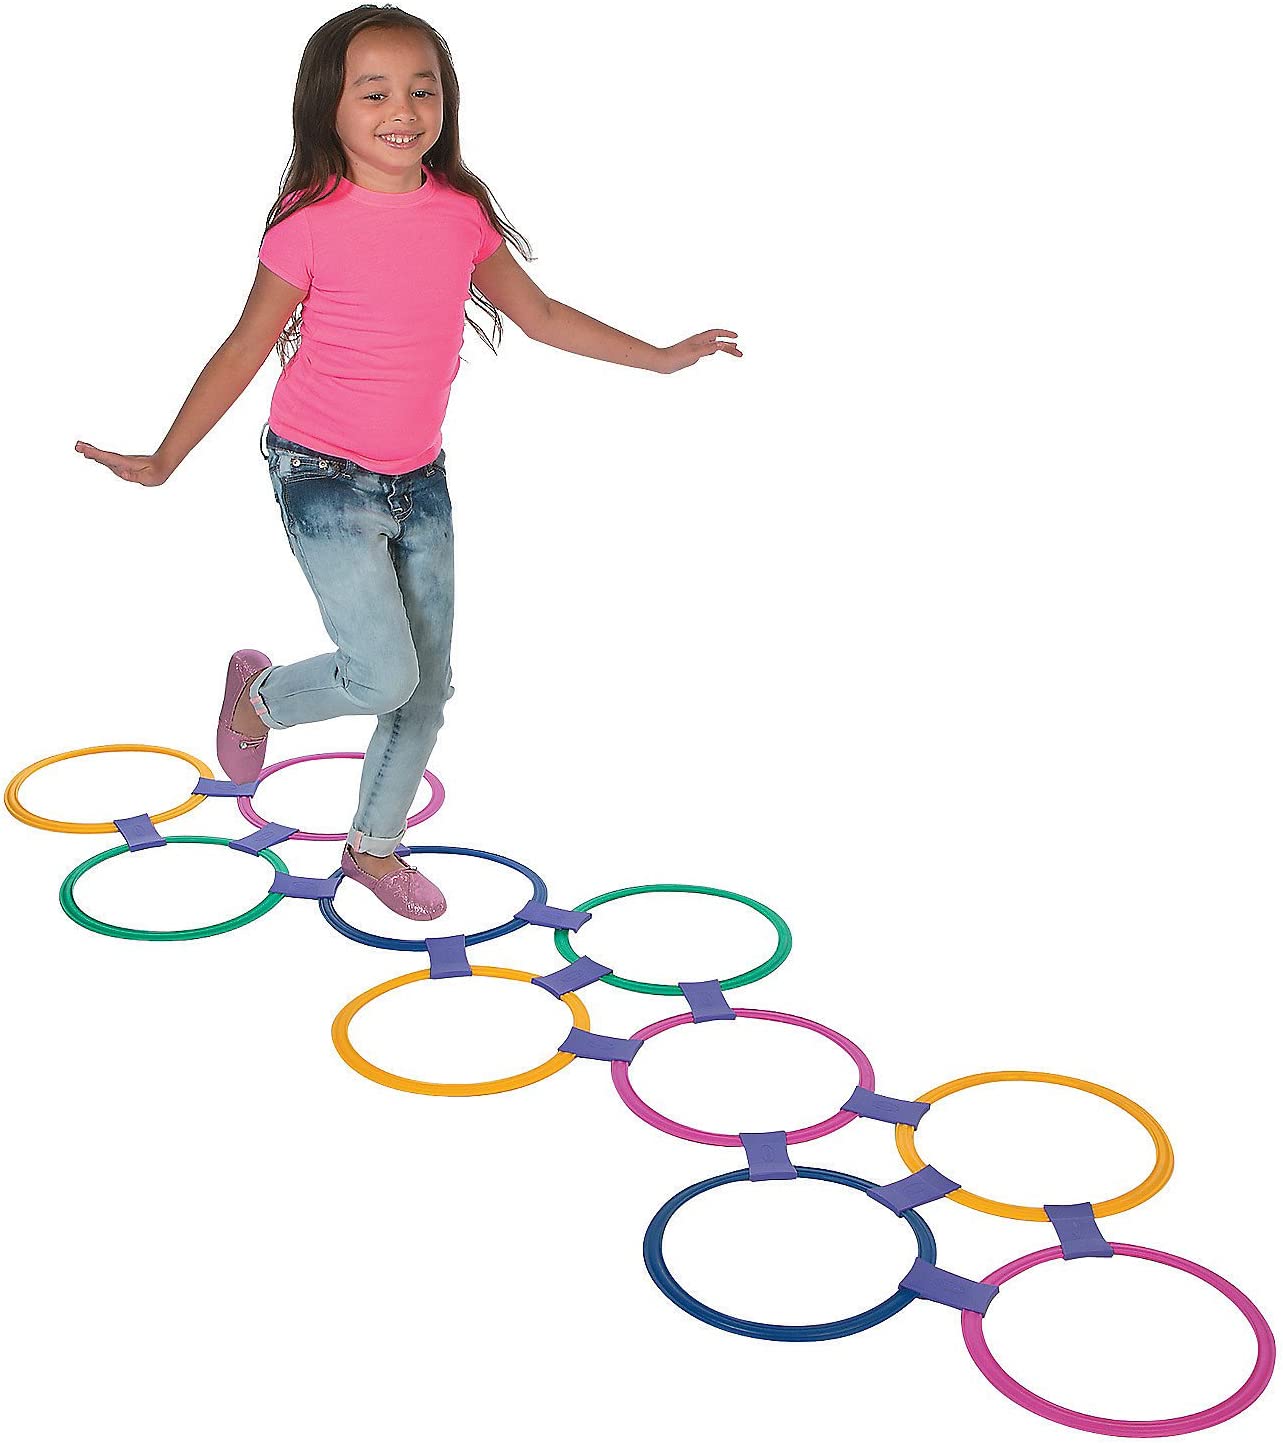 Hopscotch Ring Game